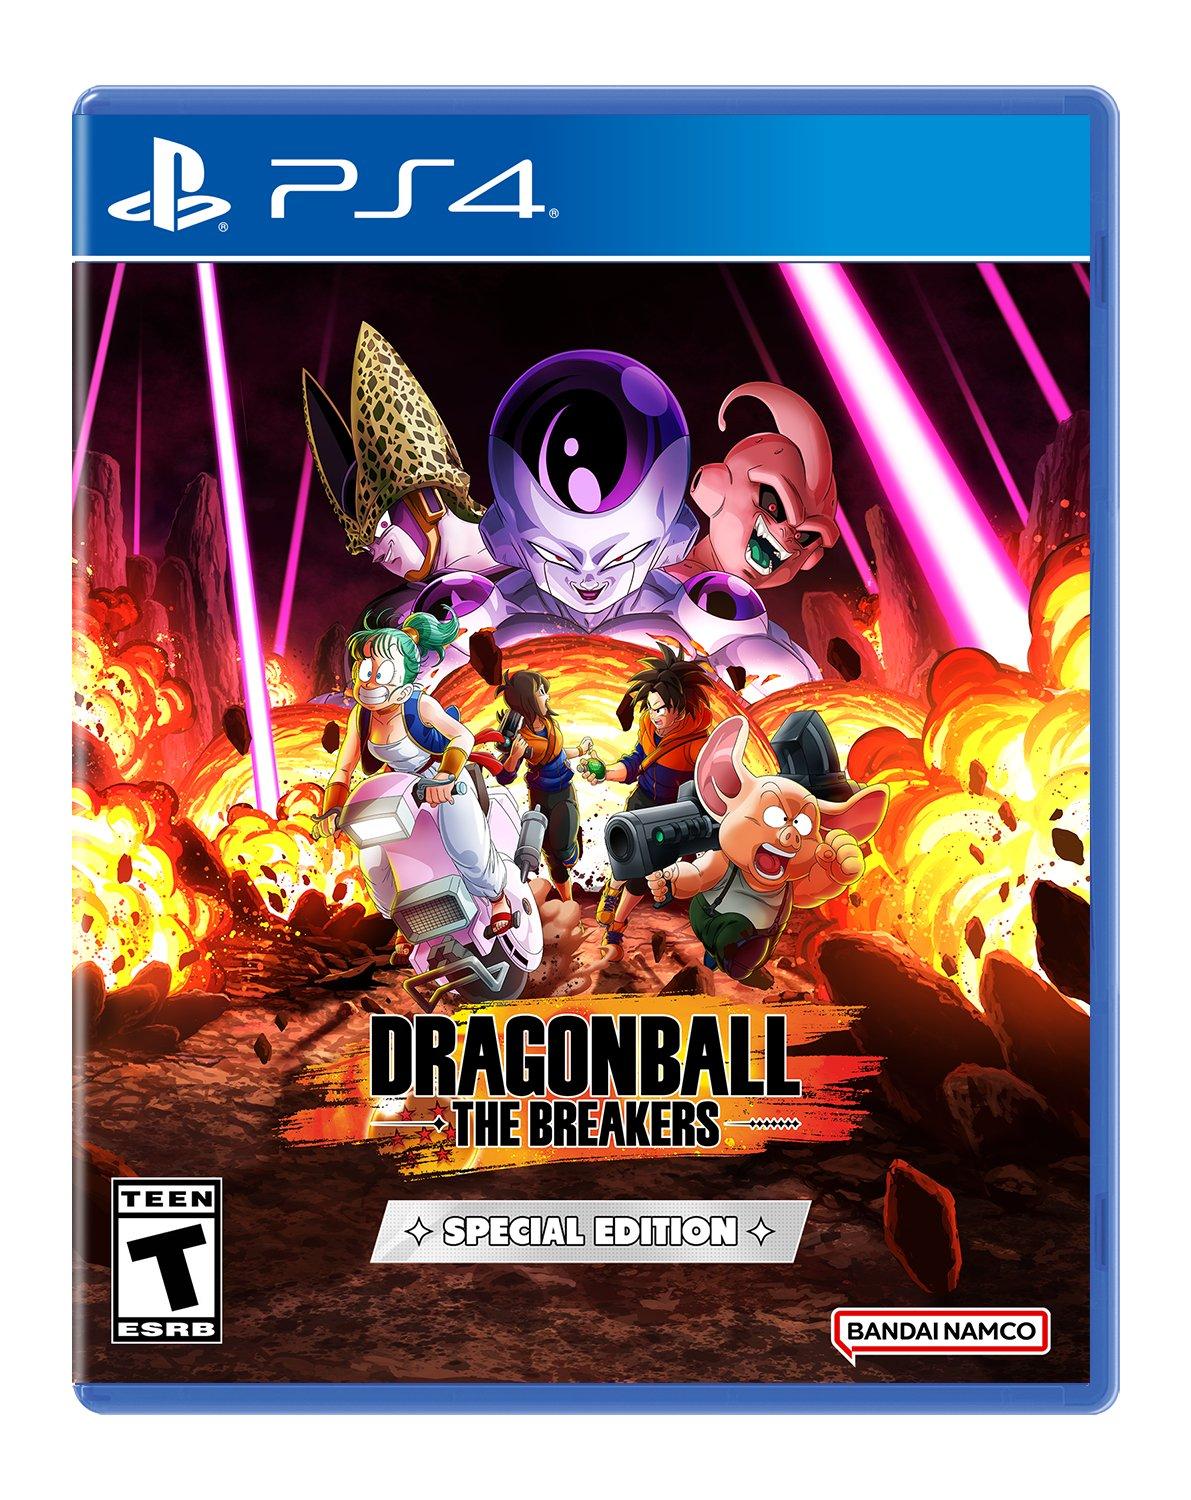 DRAGON BALL: THE BREAKERS SPECIAL EDITION - PlayStation 4